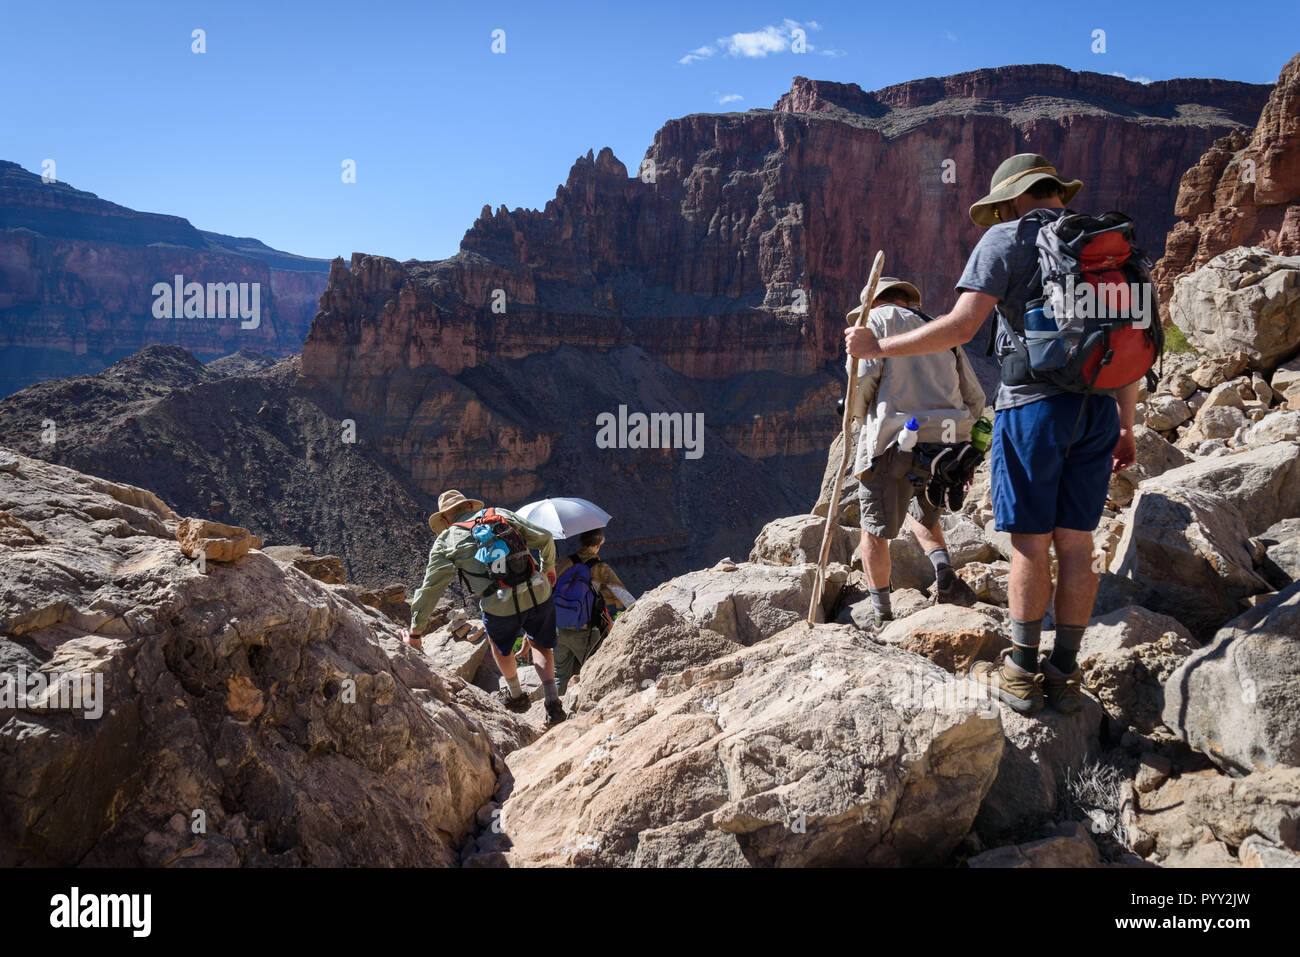 Hiking to Thunder River falls near Surprise Valley, Grand Canyon national park, USA. Stock Photo